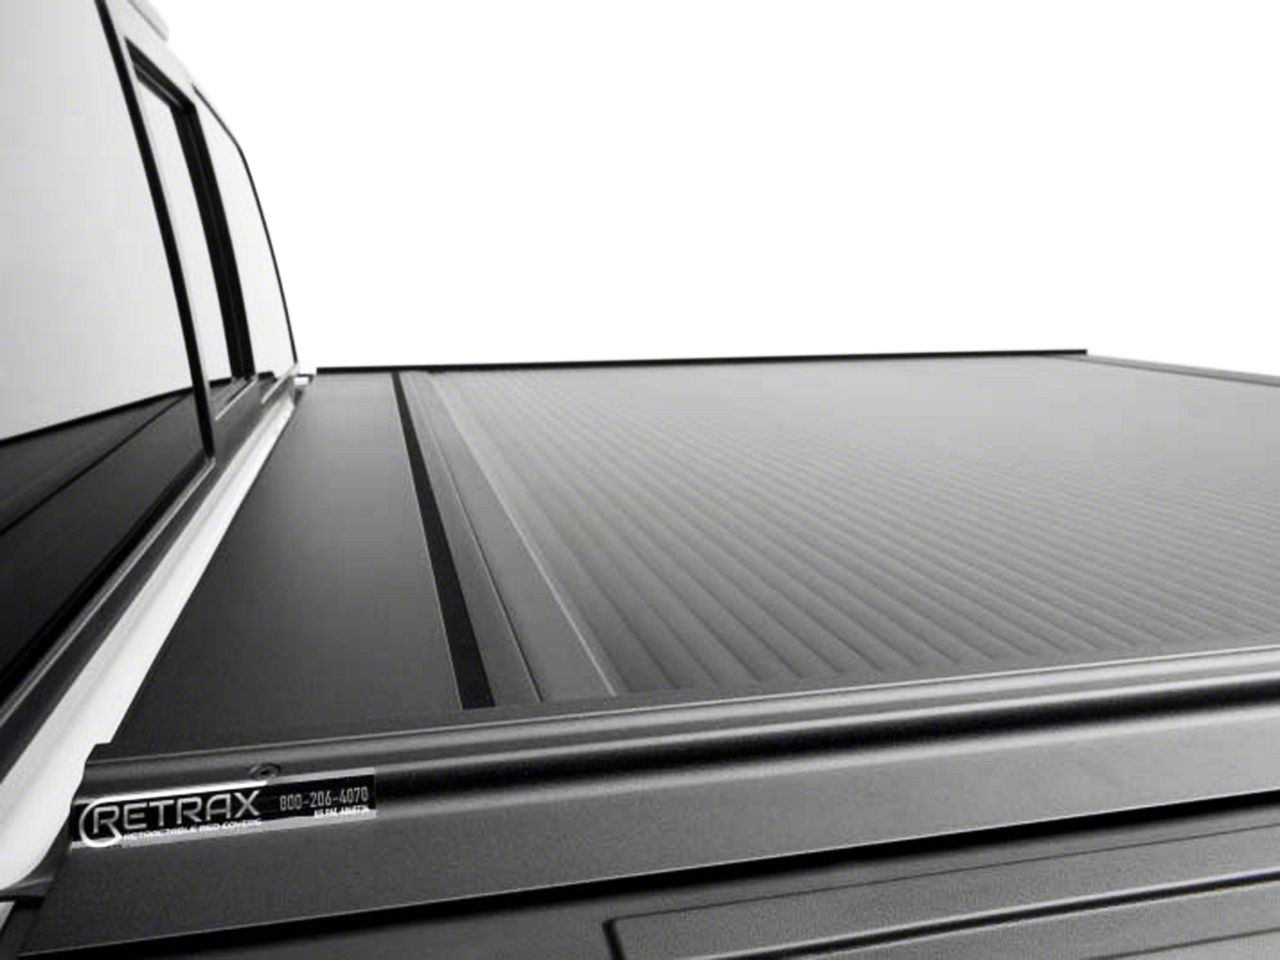 Ram3500 Bed Covers & Tonneau Covers 2003-2009